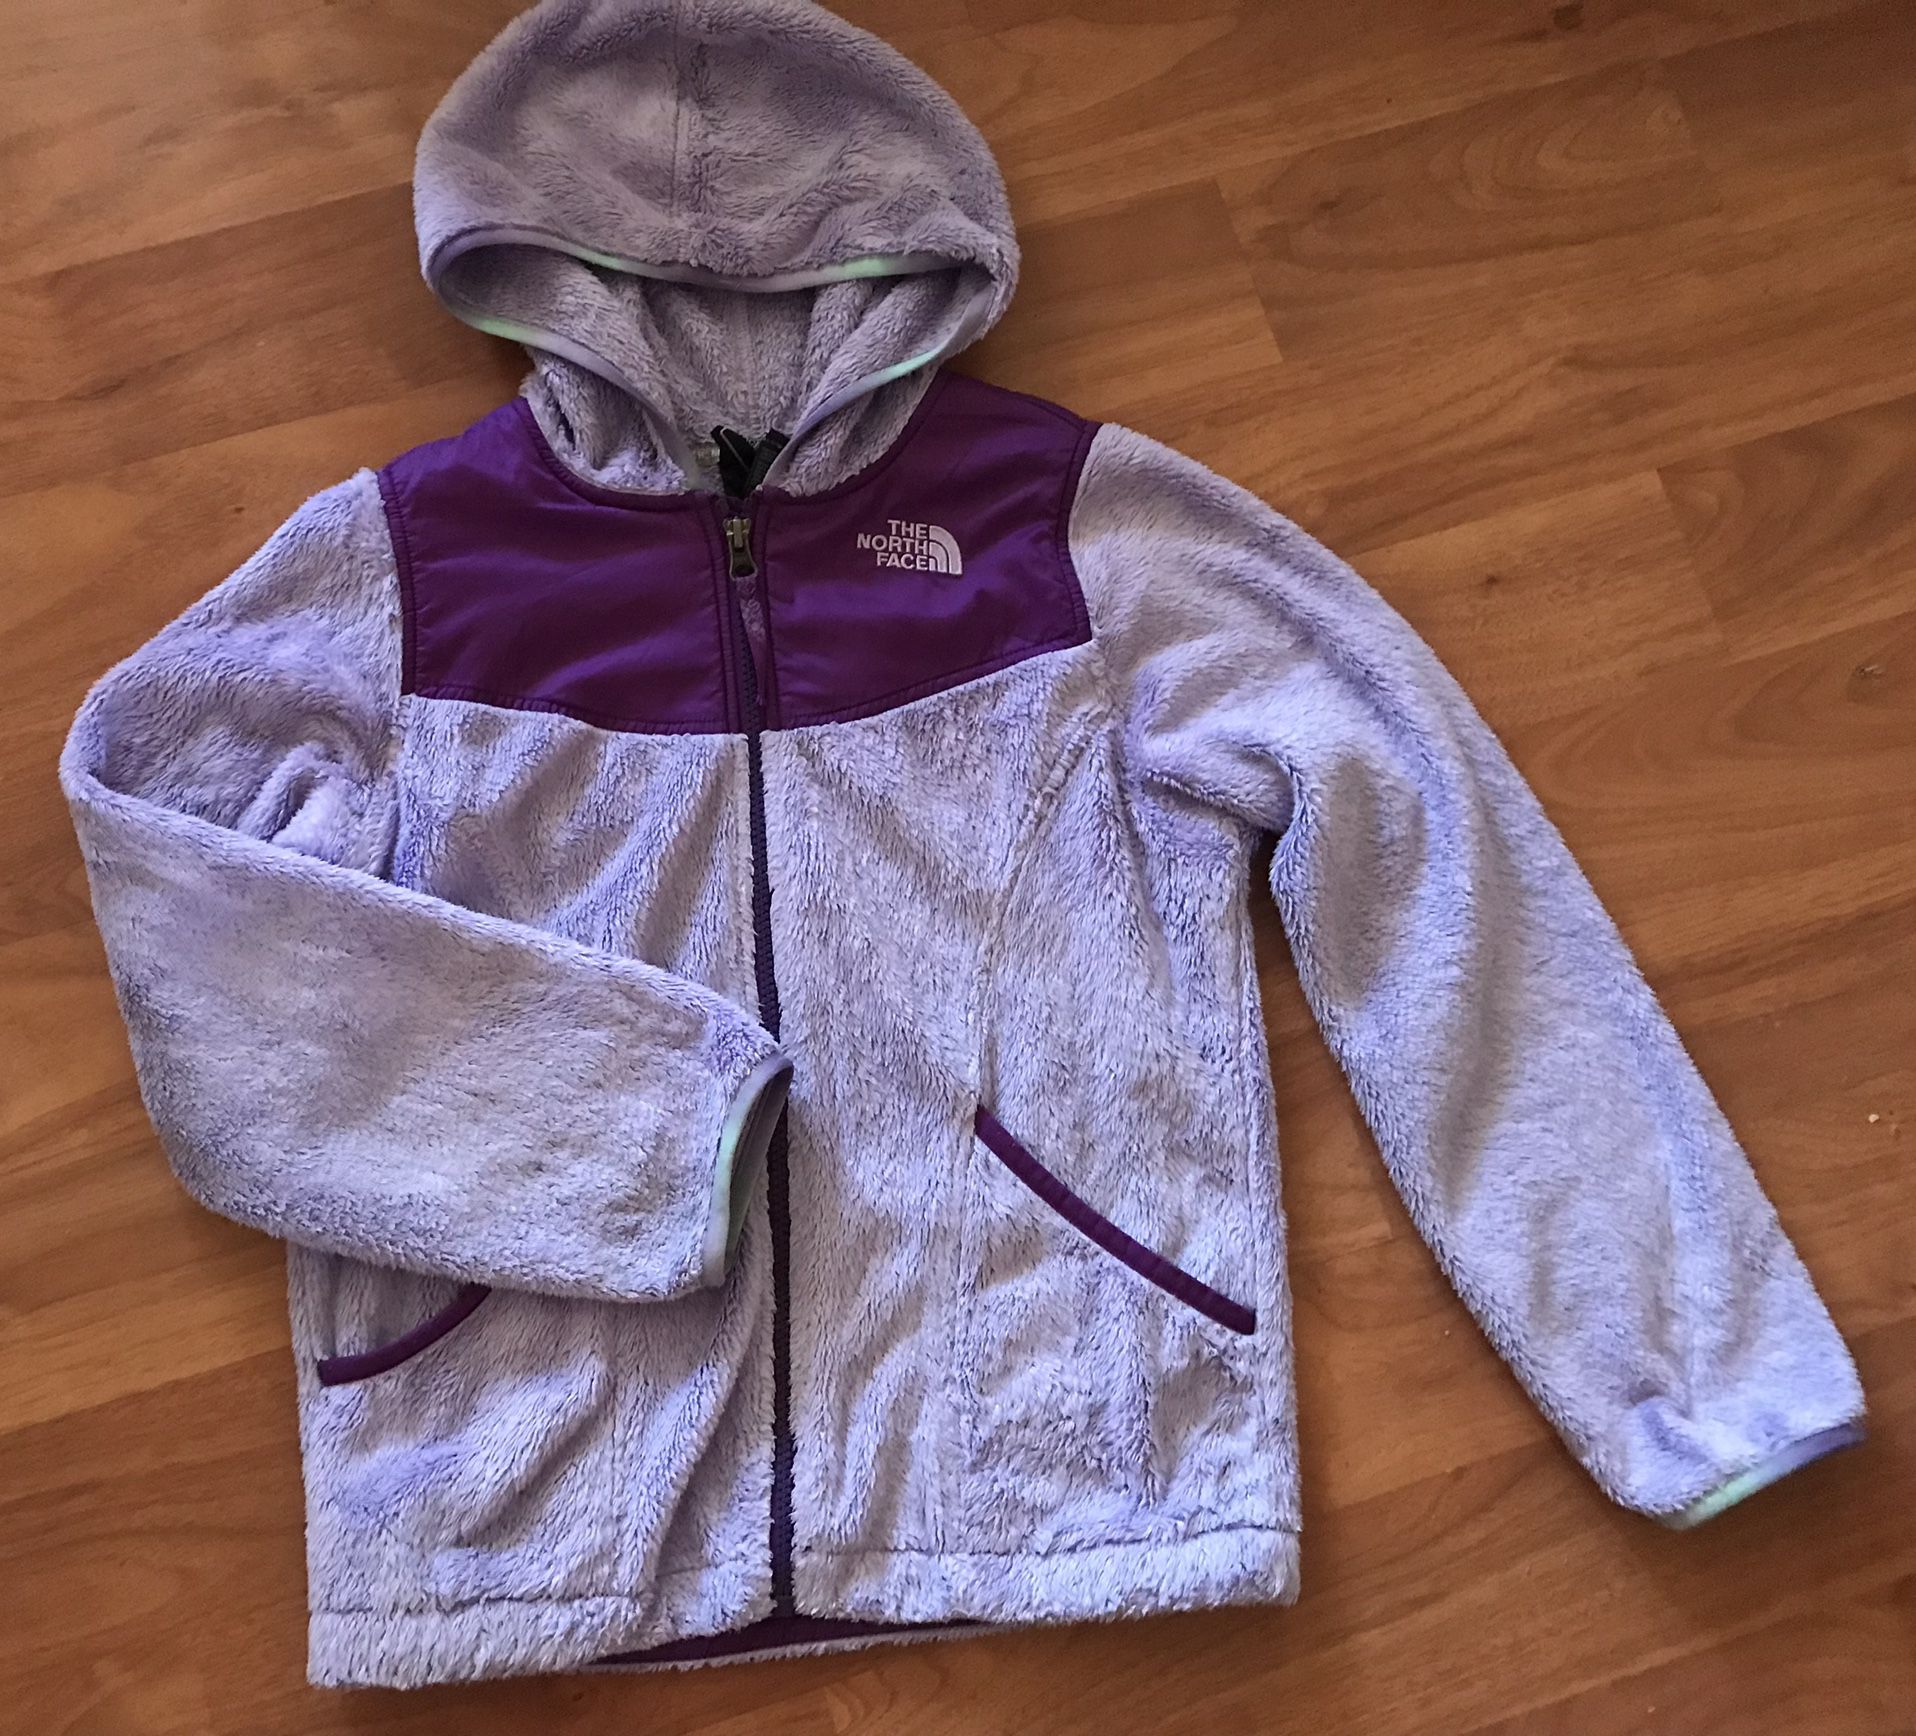 The NORTH FACE Jacket Girls M 10/12 $20